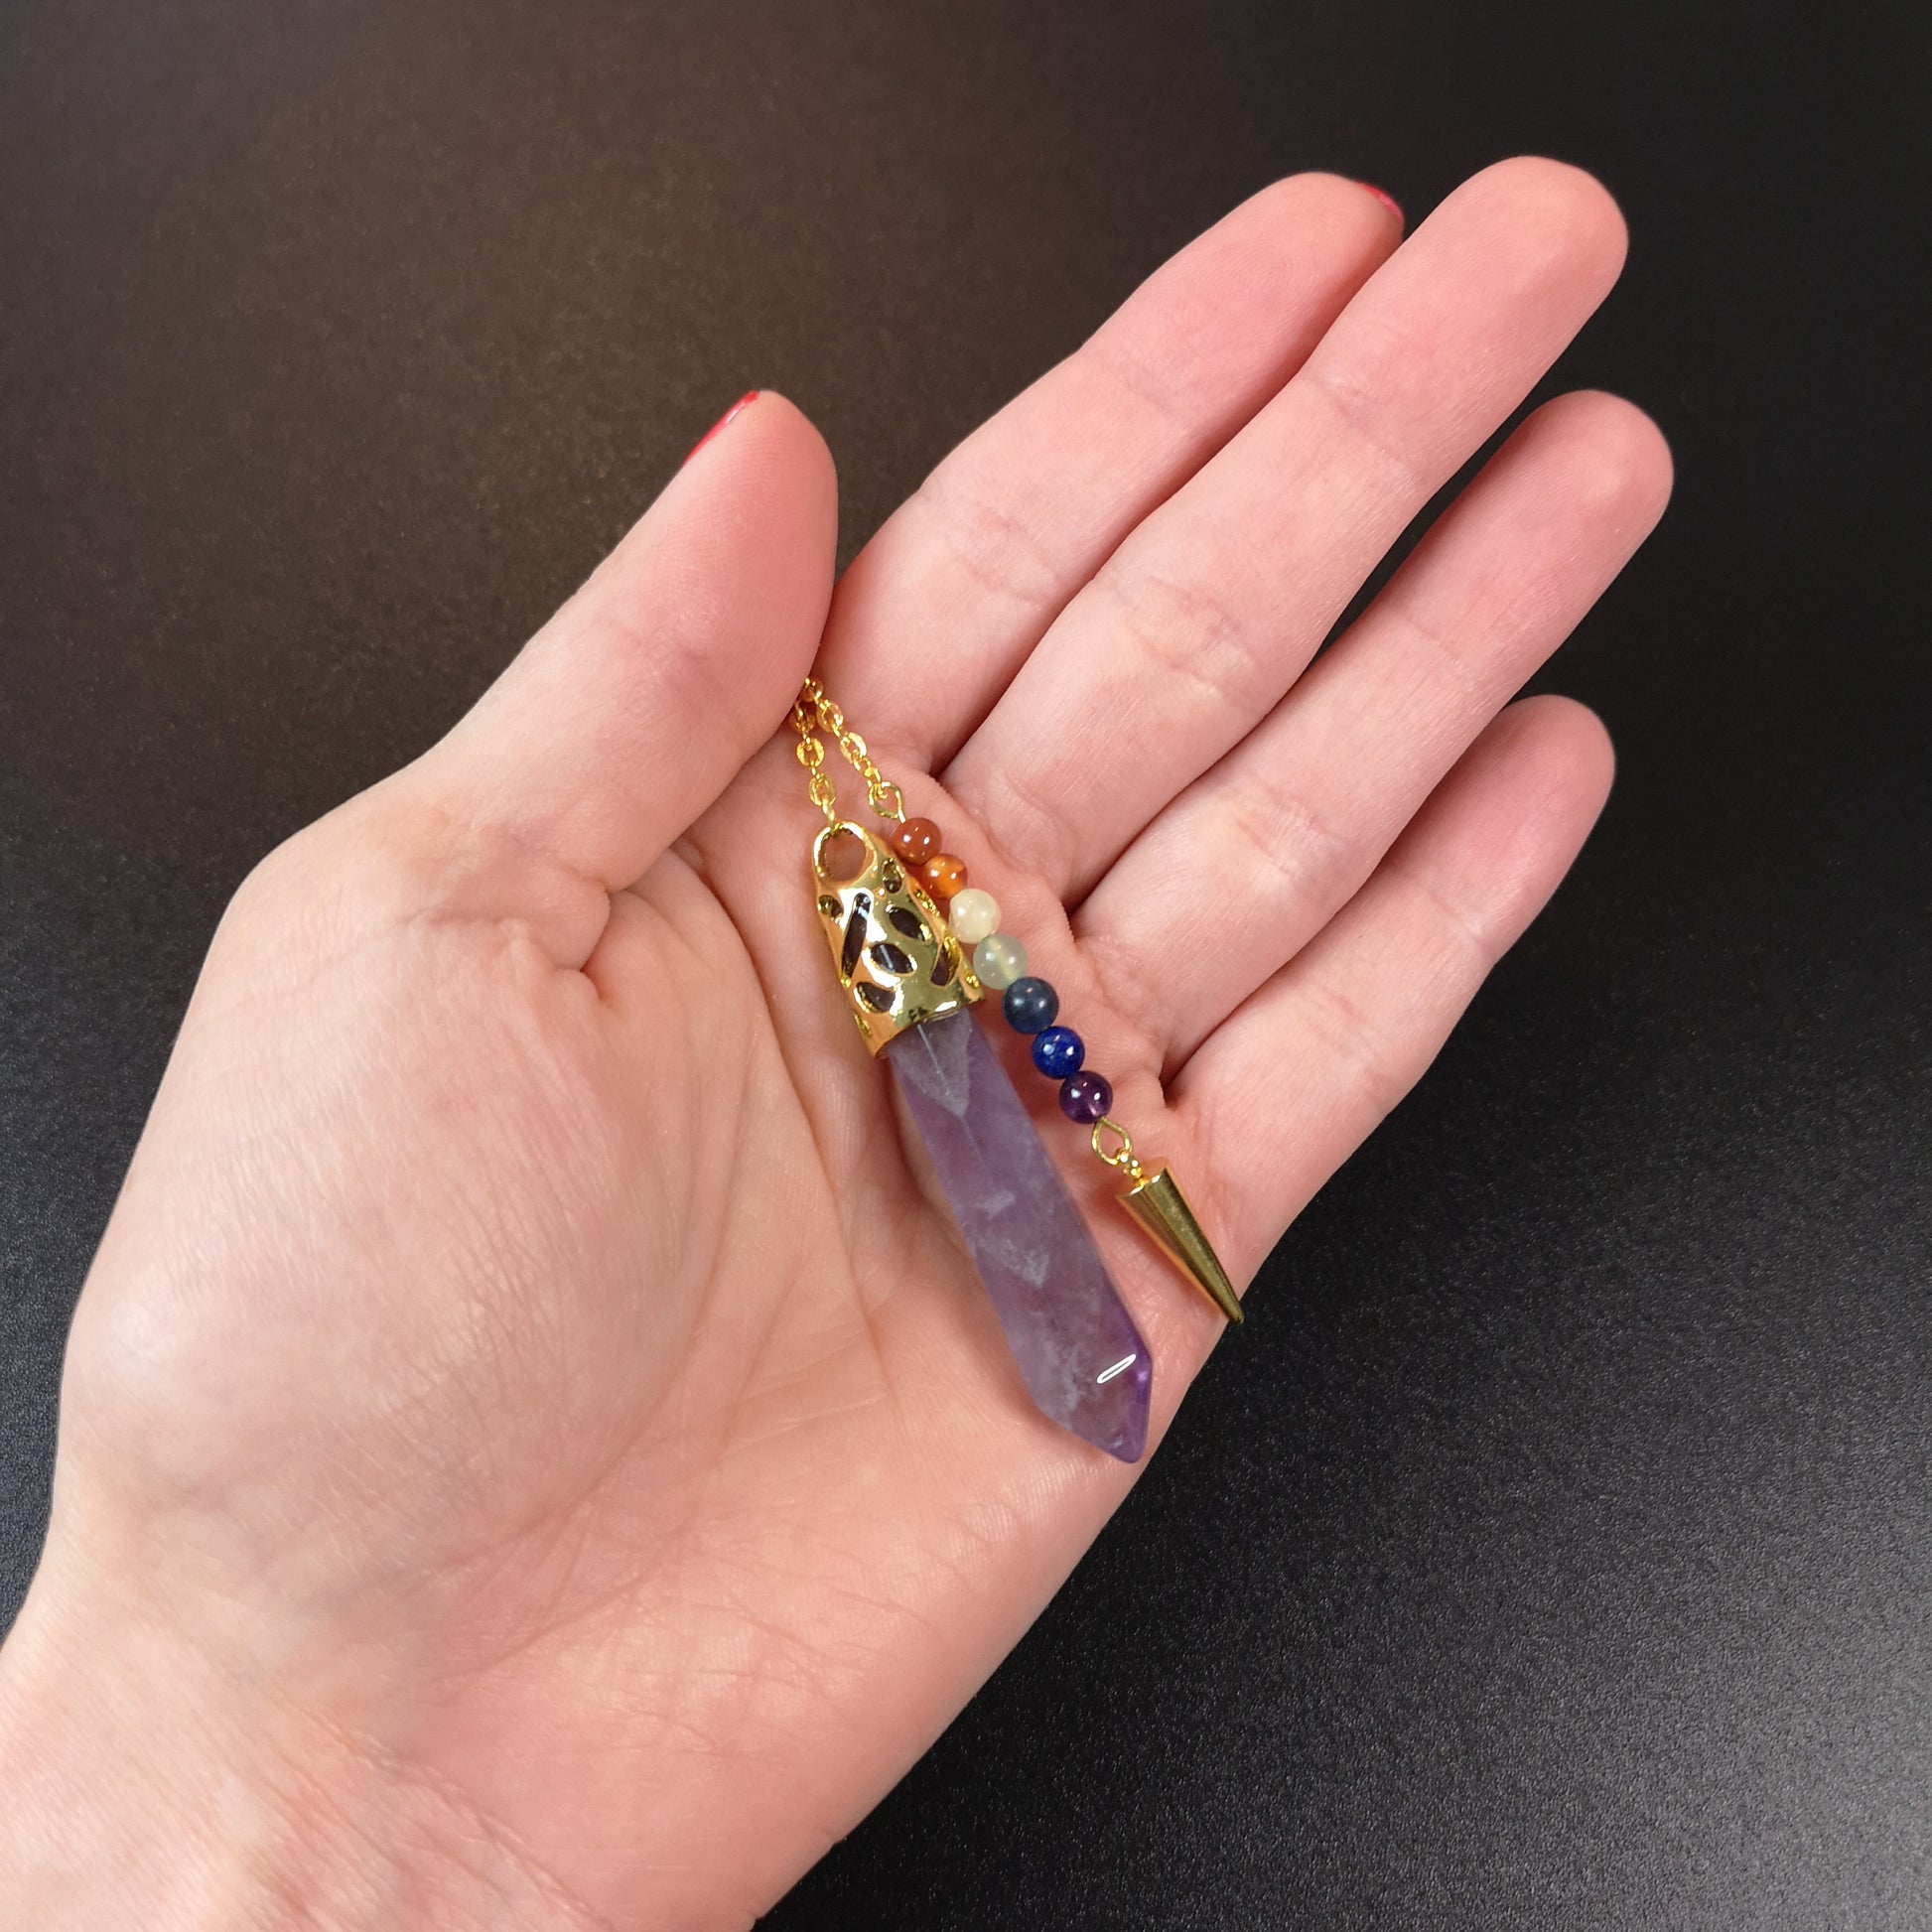 7 chakras amethyst golden pendulum with a spike - The French Witch shop